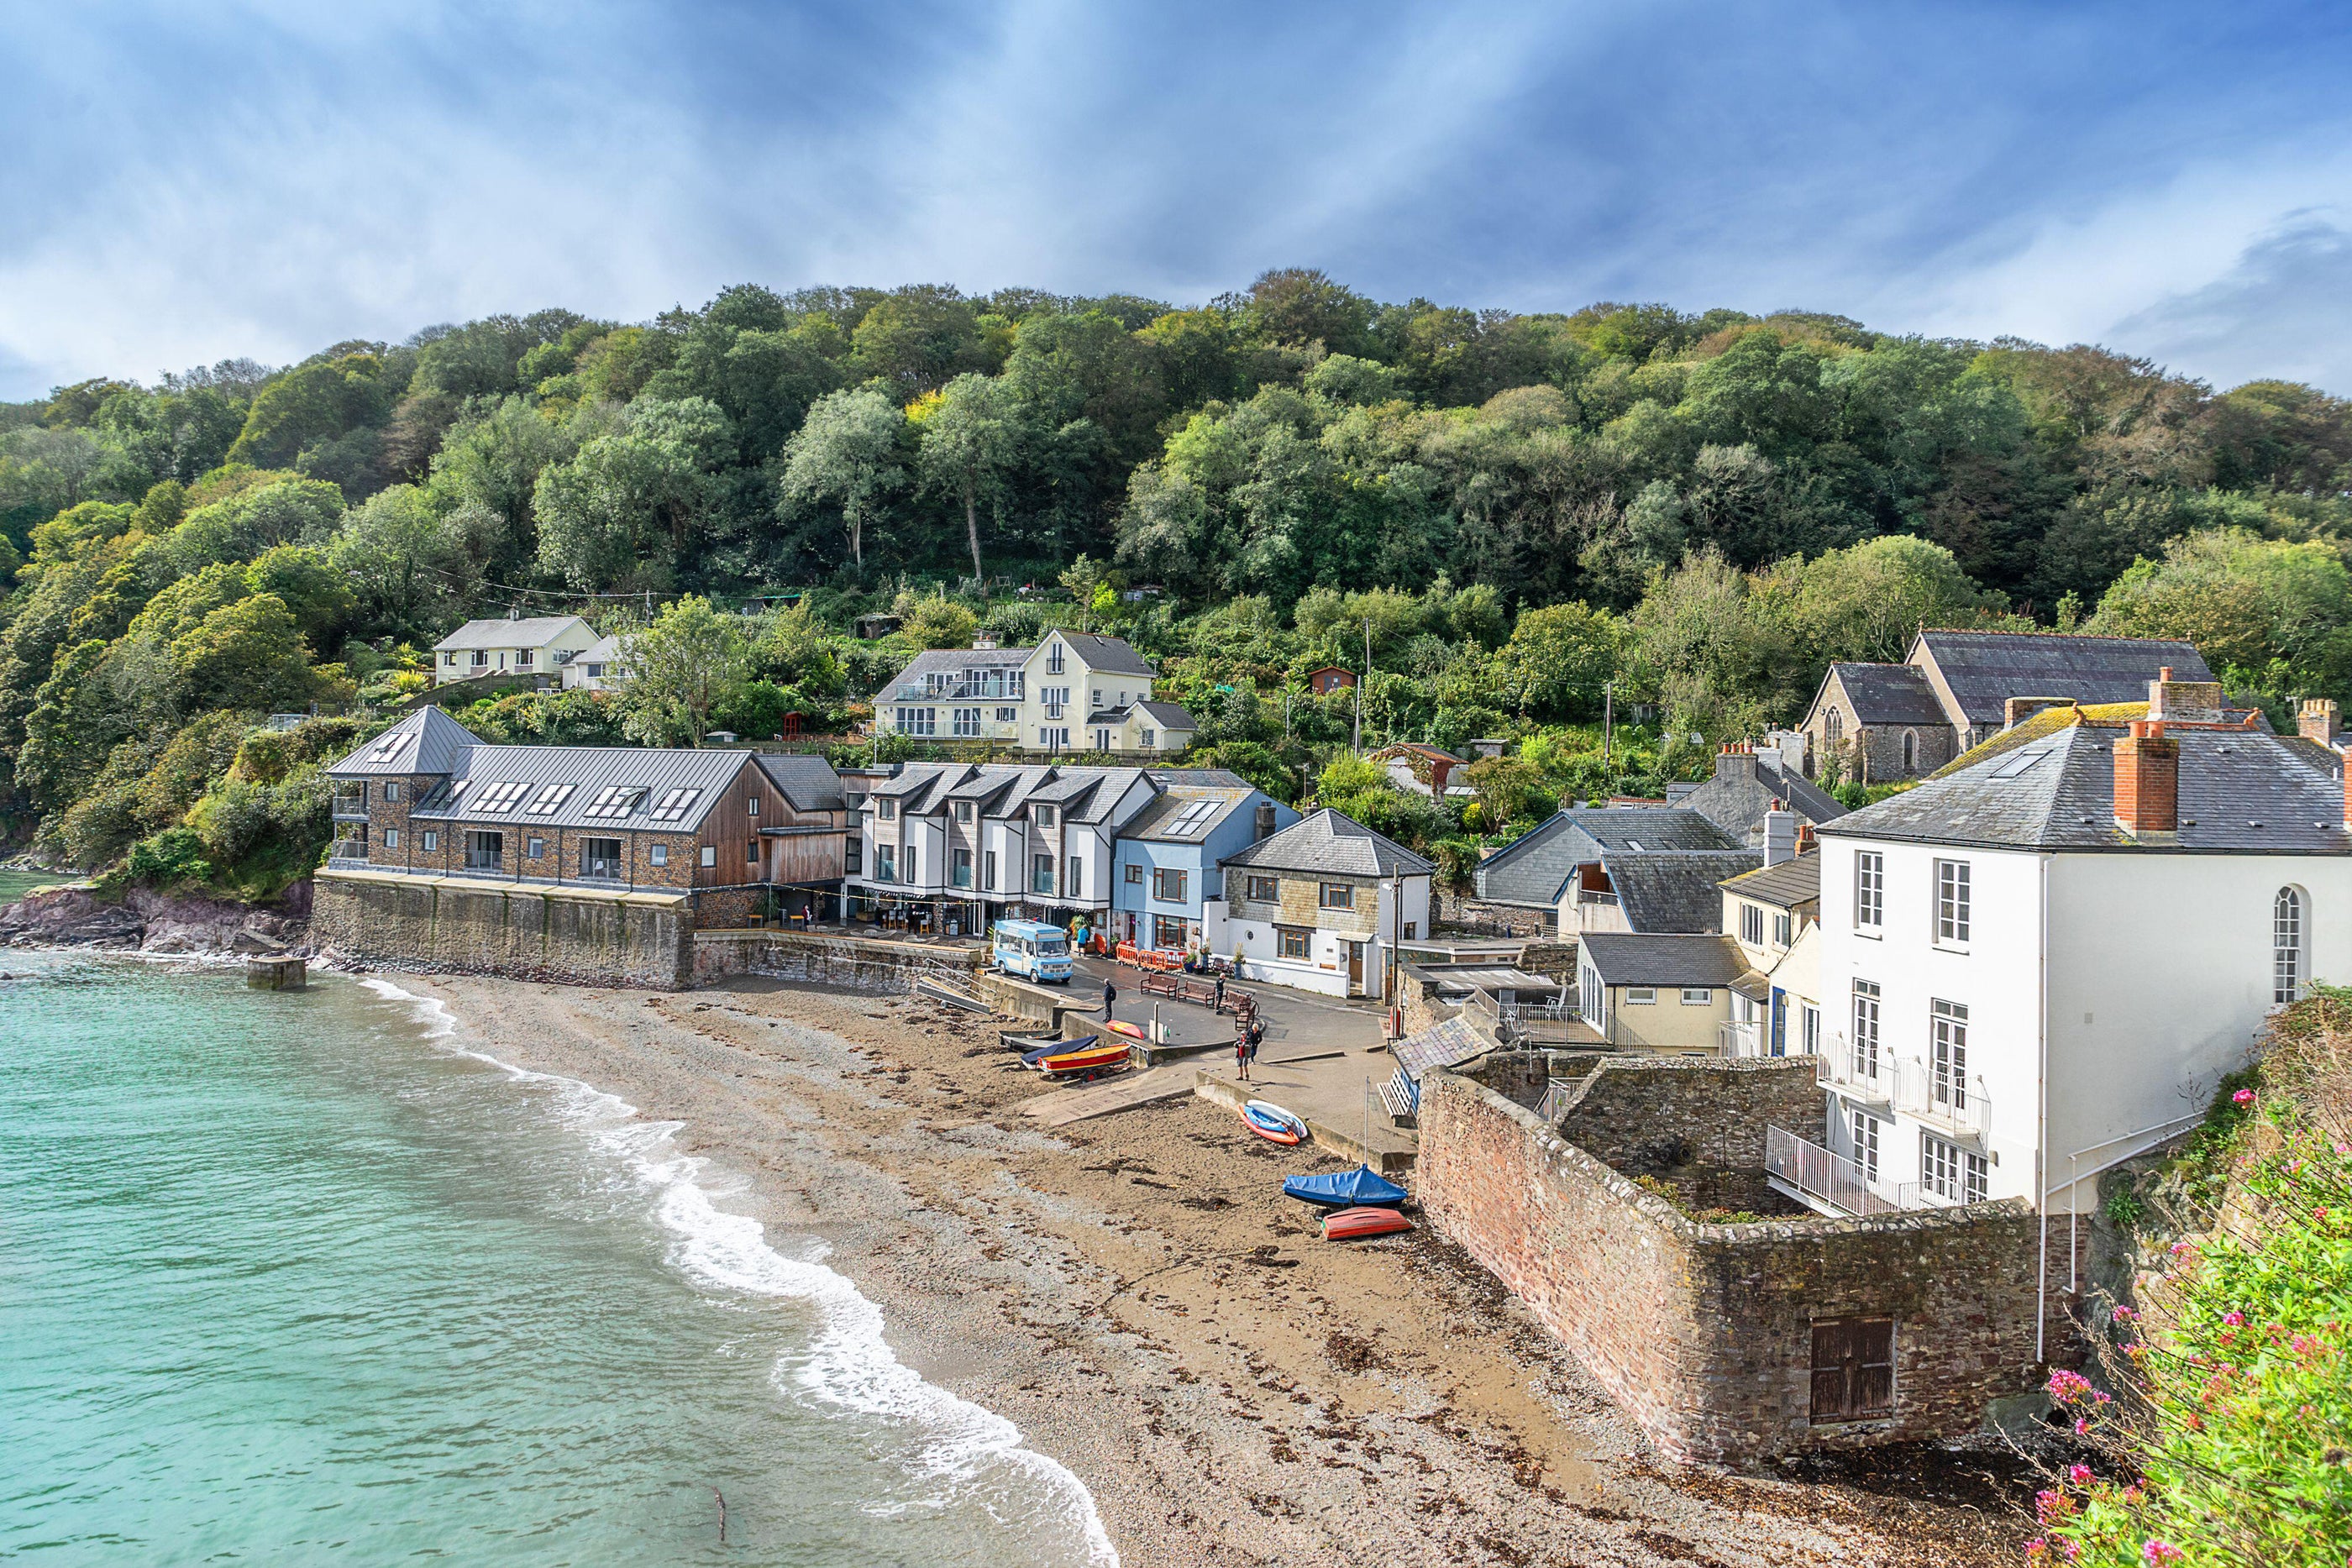 There are many hidden spots to discover along our coastlines – if you know where to look